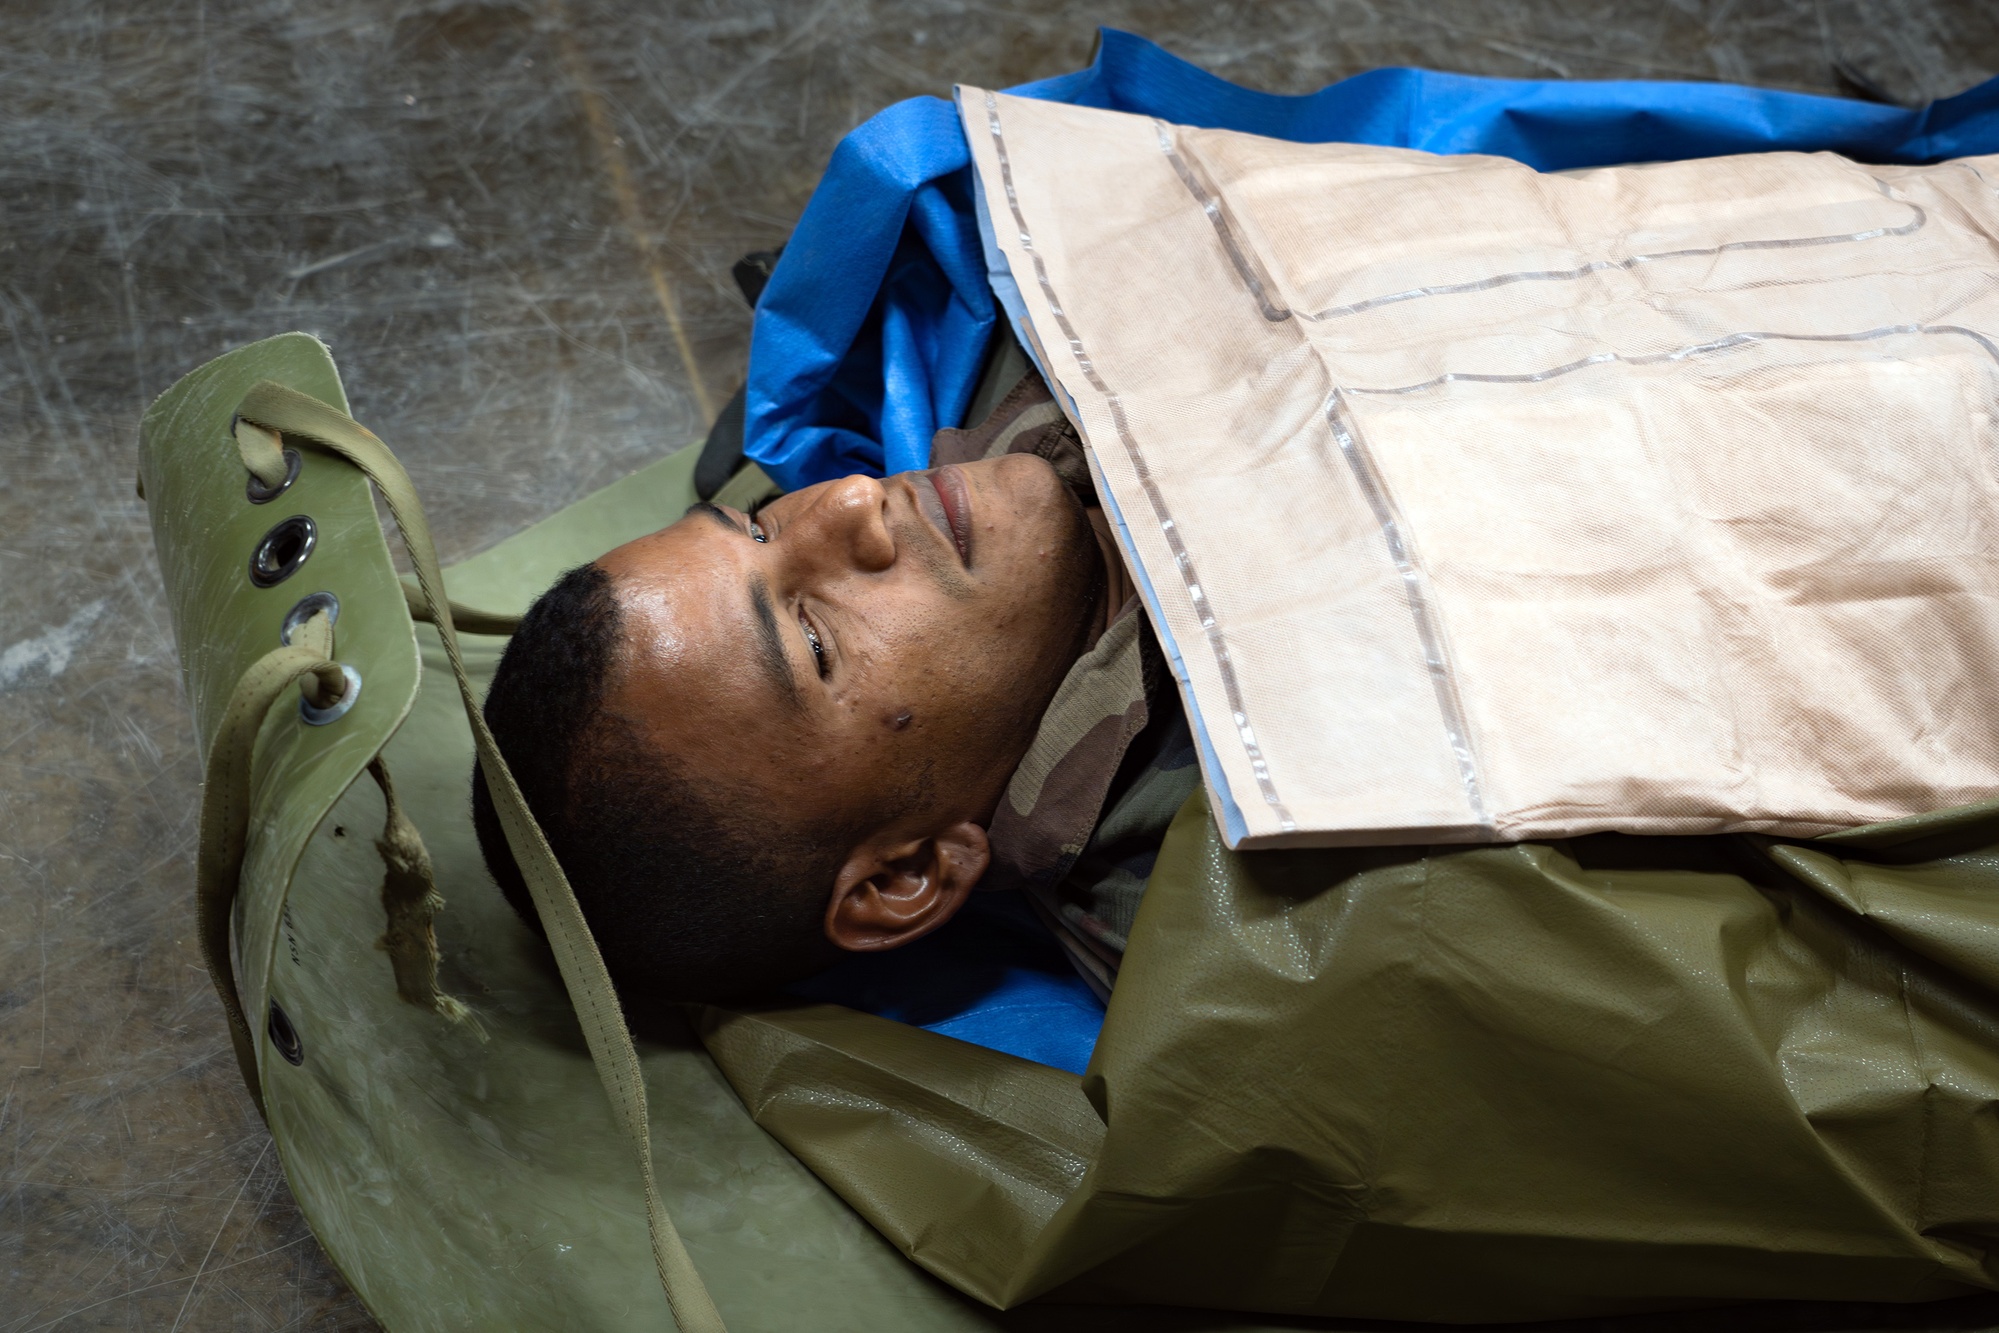 DVIDS - Images - French Armed Forces join CJTF-HOA for casualty care [Image  5 of 6]